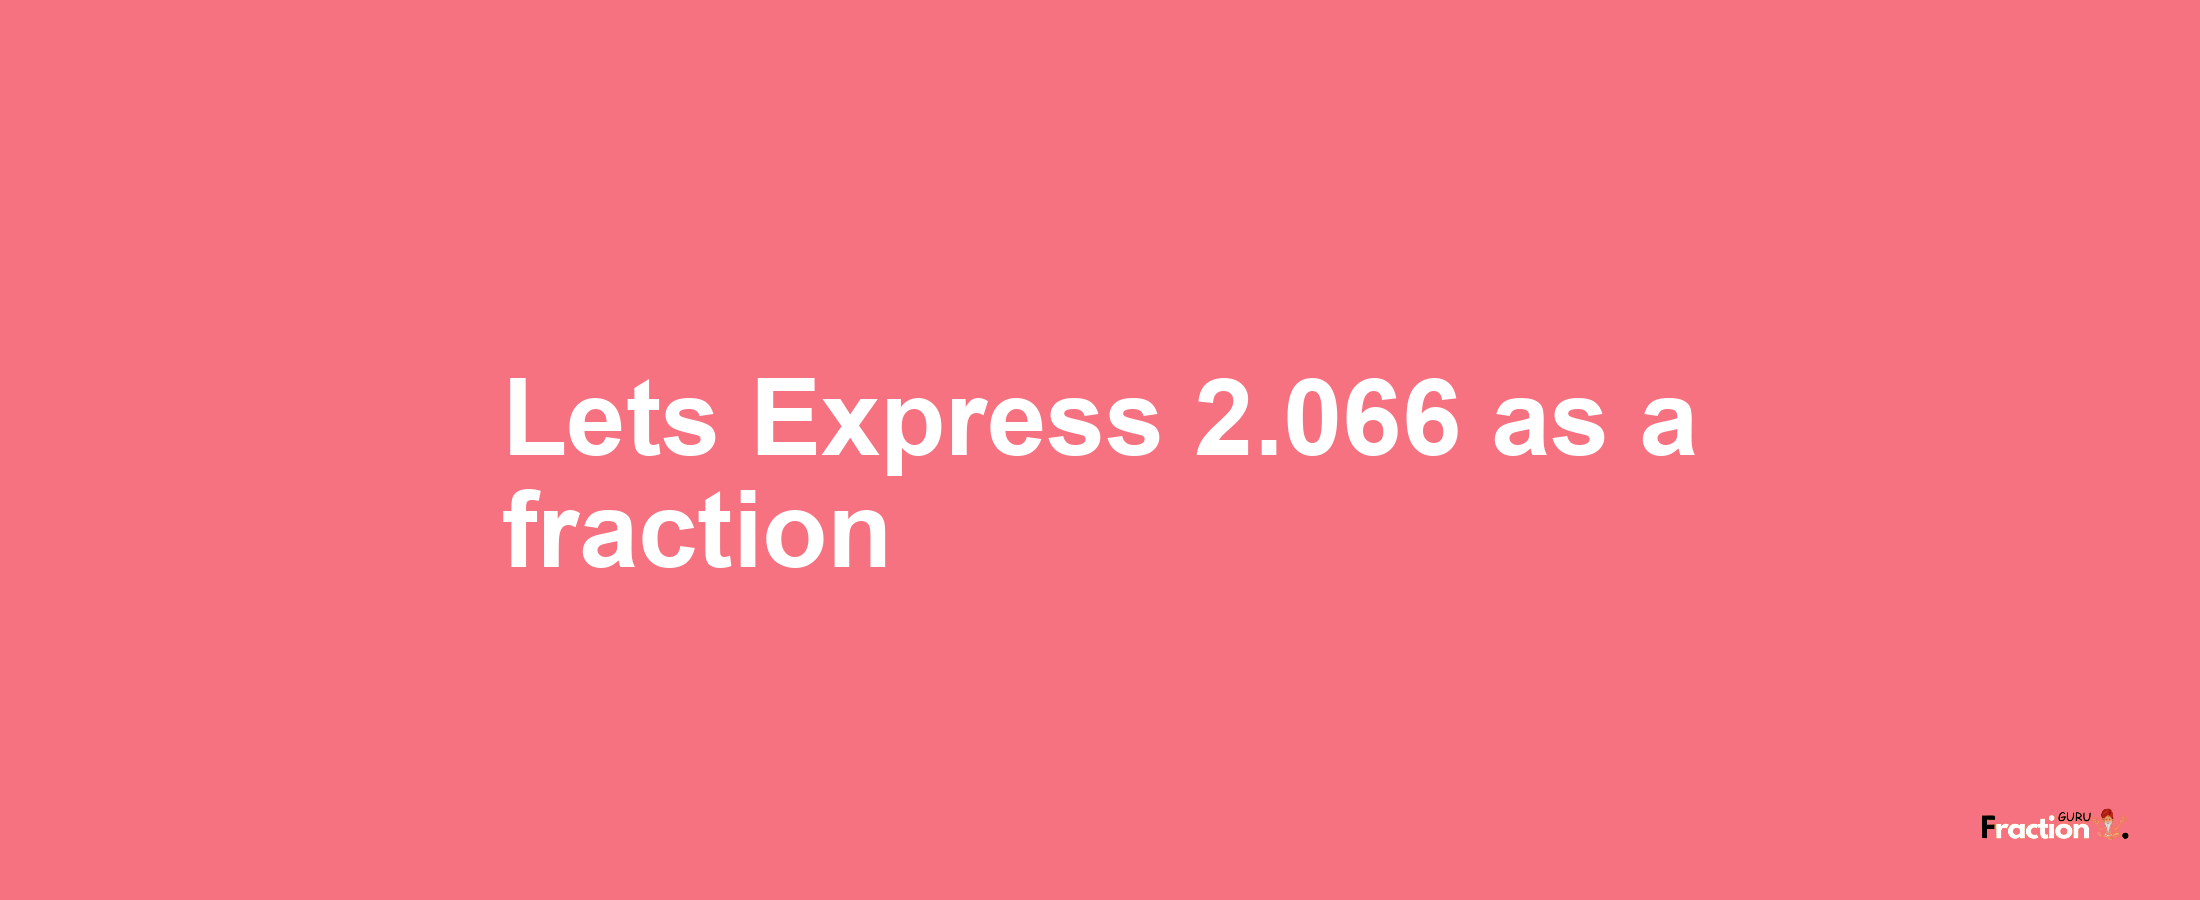 Lets Express 2.066 as afraction